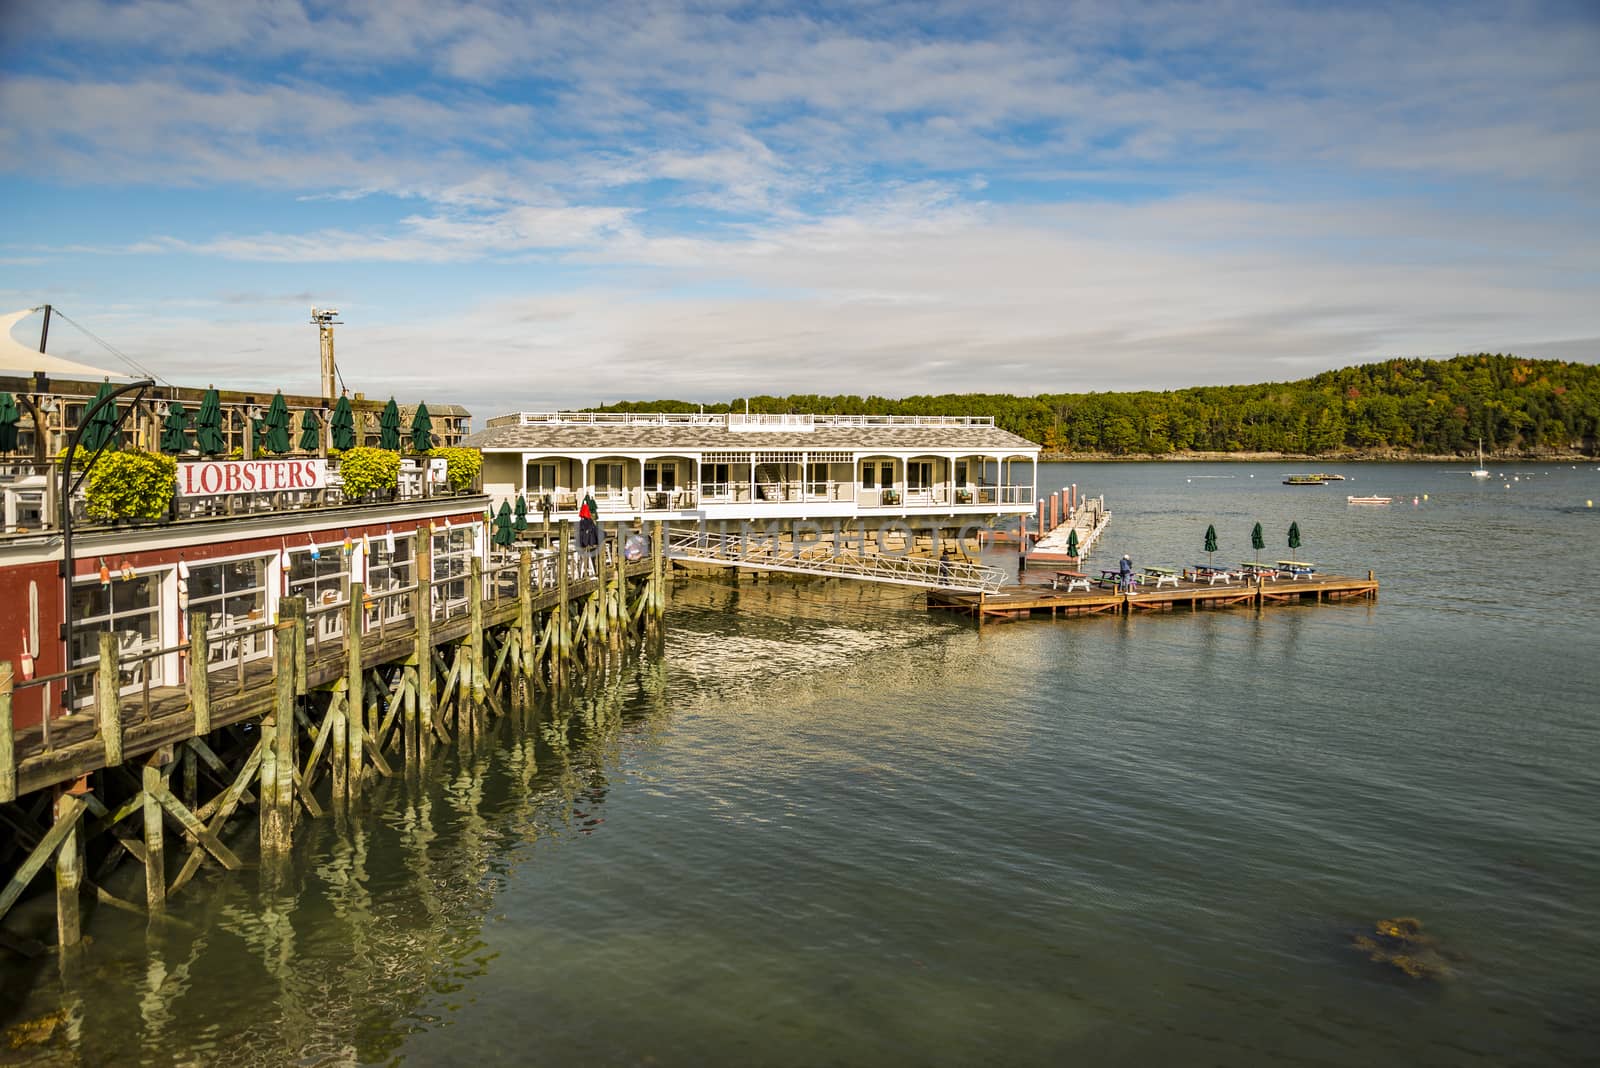 BAR HARBOR, ME - OCTOBER 02: Dockside lobster restaurant in historic Bar Harbor ME on October 02, 2016. Bar Harbor is a famous location in Down East Maine with a long history of lobstering.